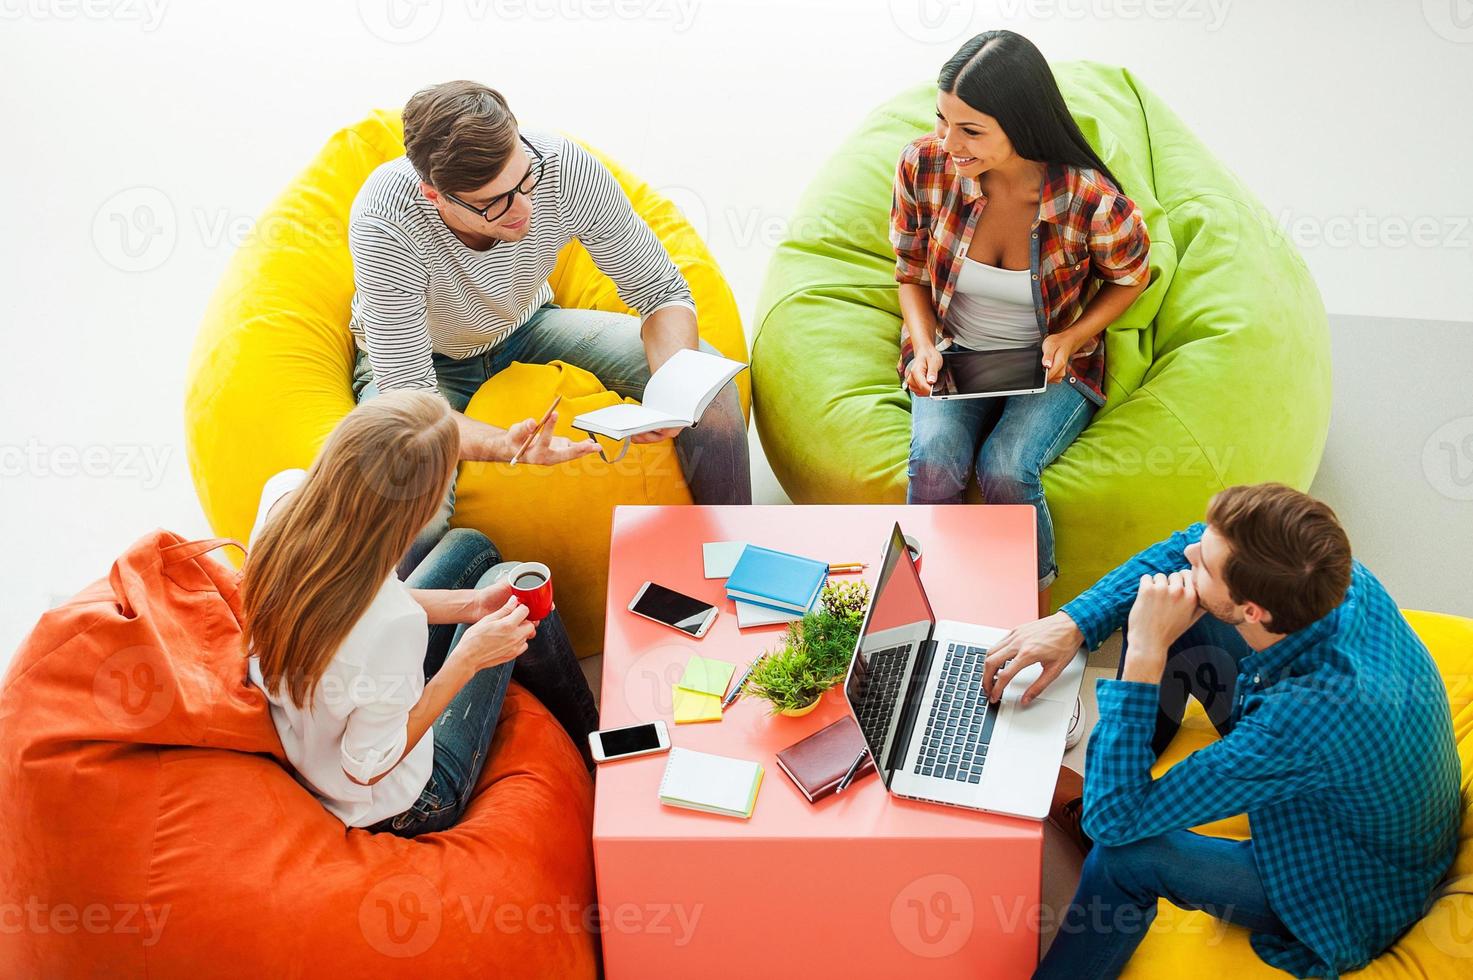 Place where ideas born. Top view of four young people working together while sitting at the colorful bean bags photo